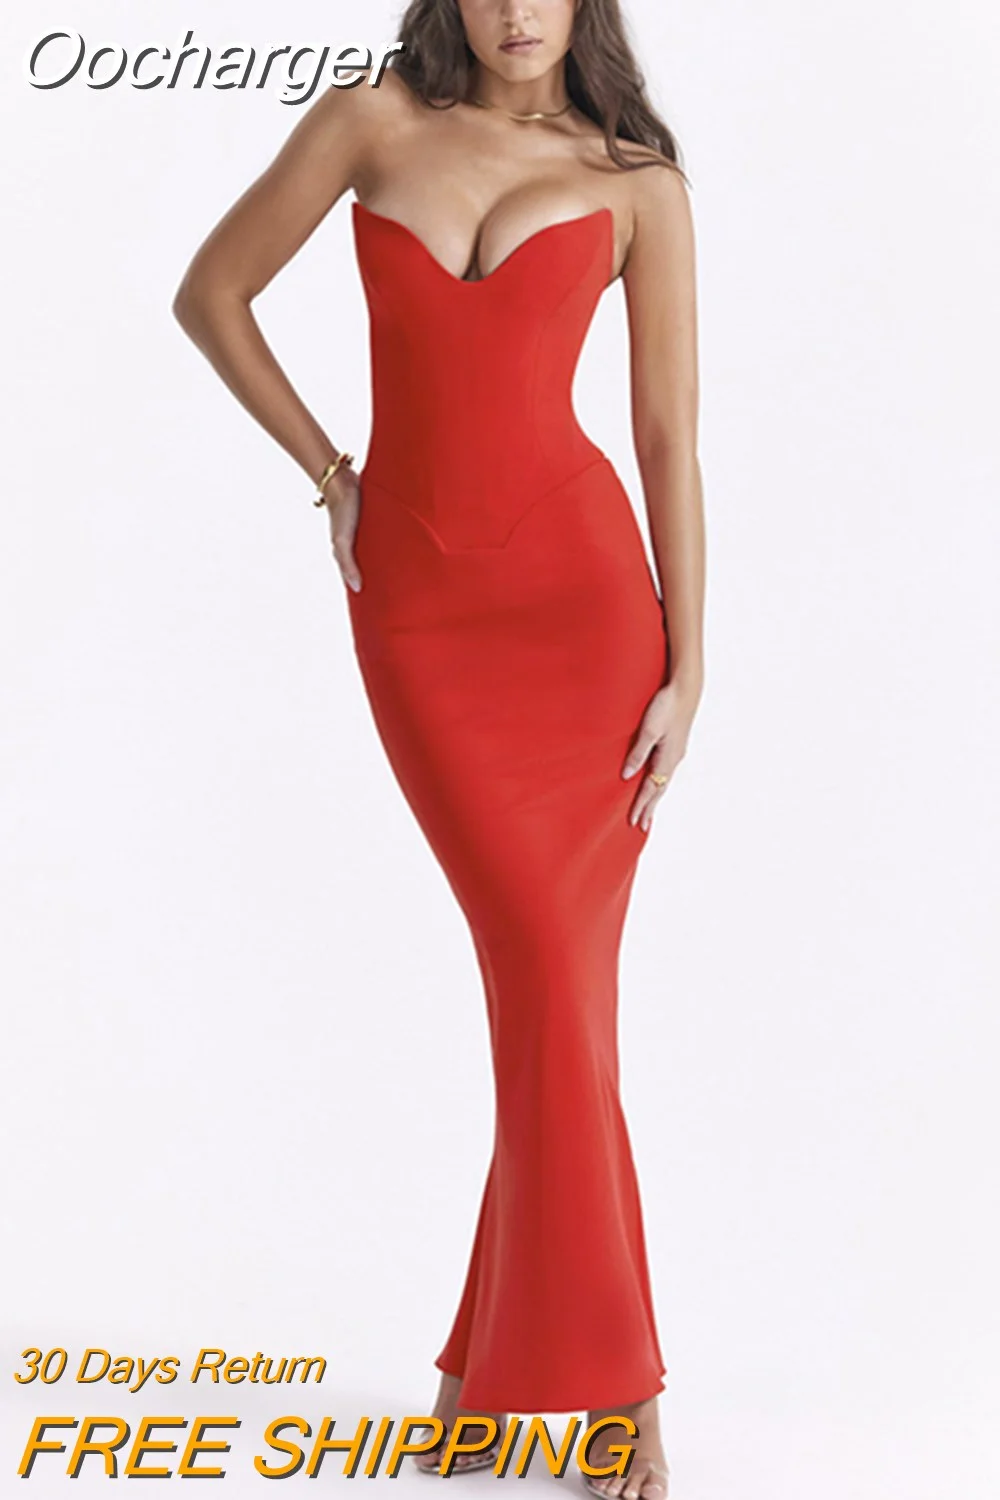 Oocharger Strapless Off-shoulder Sexy Maxi Dress For Women Gown Fashion Elegant With Fishbone Bodycon Night Club Party Dress